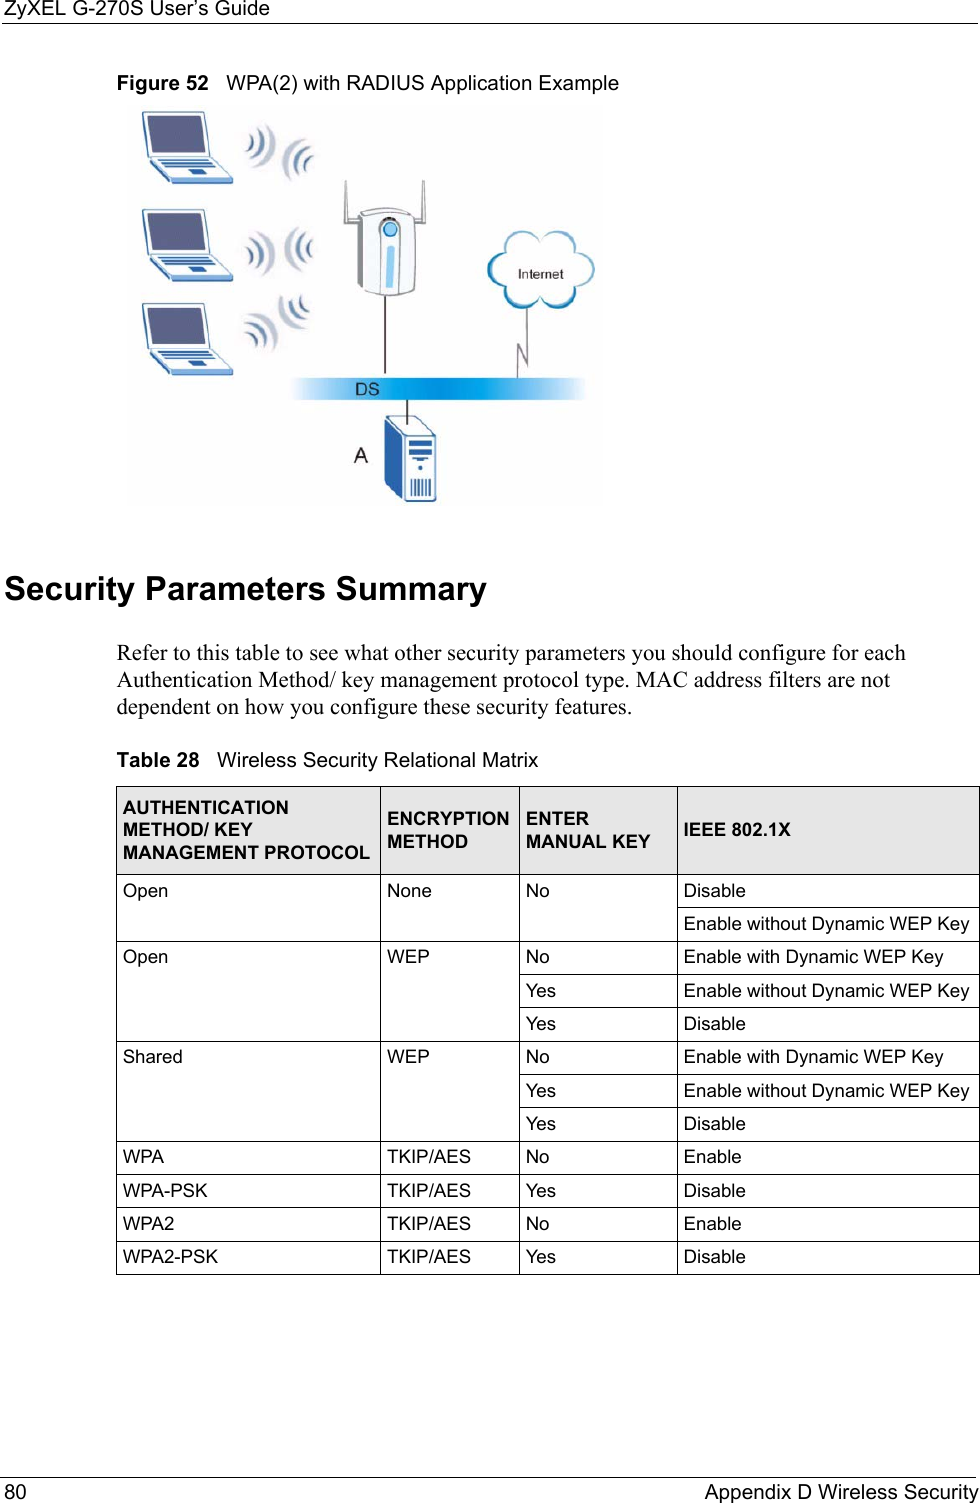 ZyXEL G-270S User’s Guide80 Appendix D Wireless SecurityFigure 52   WPA(2) with RADIUS Application ExampleSecurity Parameters SummaryRefer to this table to see what other security parameters you should configure for each Authentication Method/ key management protocol type. MAC address filters are not dependent on how you configure these security features.Table 28   Wireless Security Relational MatrixAUTHENTICATION METHOD/ KEY MANAGEMENT PROTOCOLENCRYPTION METHODENTER MANUAL KEY IEEE 802.1XOpen None No DisableEnable without Dynamic WEP KeyOpen WEP No           Enable with Dynamic WEP KeyYes Enable without Dynamic WEP KeyYes DisableShared WEP  No           Enable with Dynamic WEP KeyYes Enable without Dynamic WEP KeyYes DisableWPA  TKIP/AES No EnableWPA-PSK  TKIP/AES Yes DisableWPA2 TKIP/AES No EnableWPA2-PSK  TKIP/AES Yes Disable